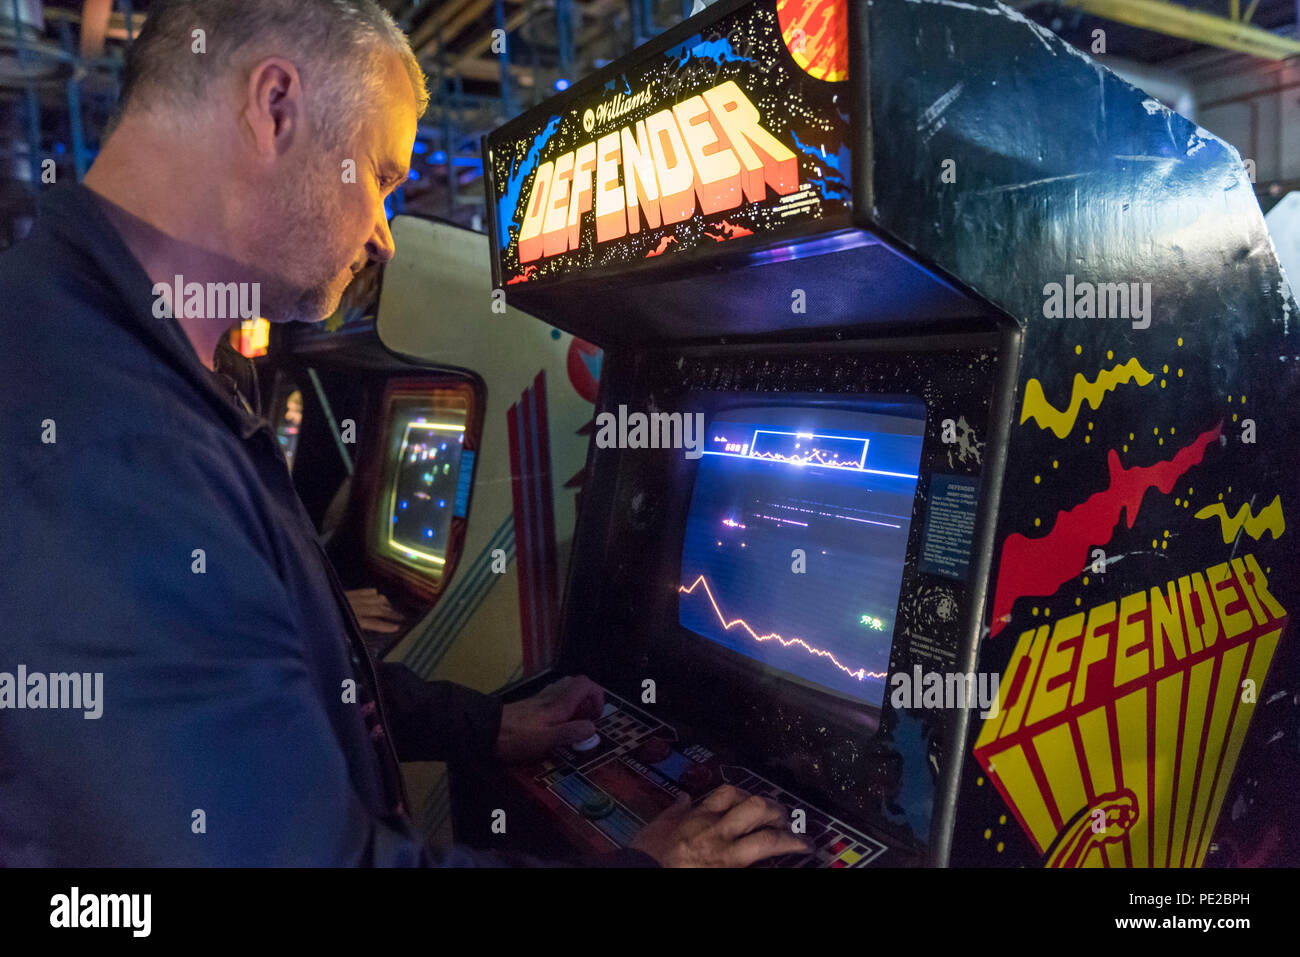 London, UK.  12 August 2018. A visitor plays Defender at retro games festival PLAY Expo held in London for the first time at Printworks, Canada Water. Game enthusiasts visited to rediscover the classics, from Donkey Kong, Pong, Super Mario Bros. and Space Invaders to vintage pinball machines, VR, indie games and a dedicated Minecraft zone. The show also included a sneak preview of new retro gaming streaming service, Antstream.  Credit: Stephen Chung / Alamy Live News Stock Photo